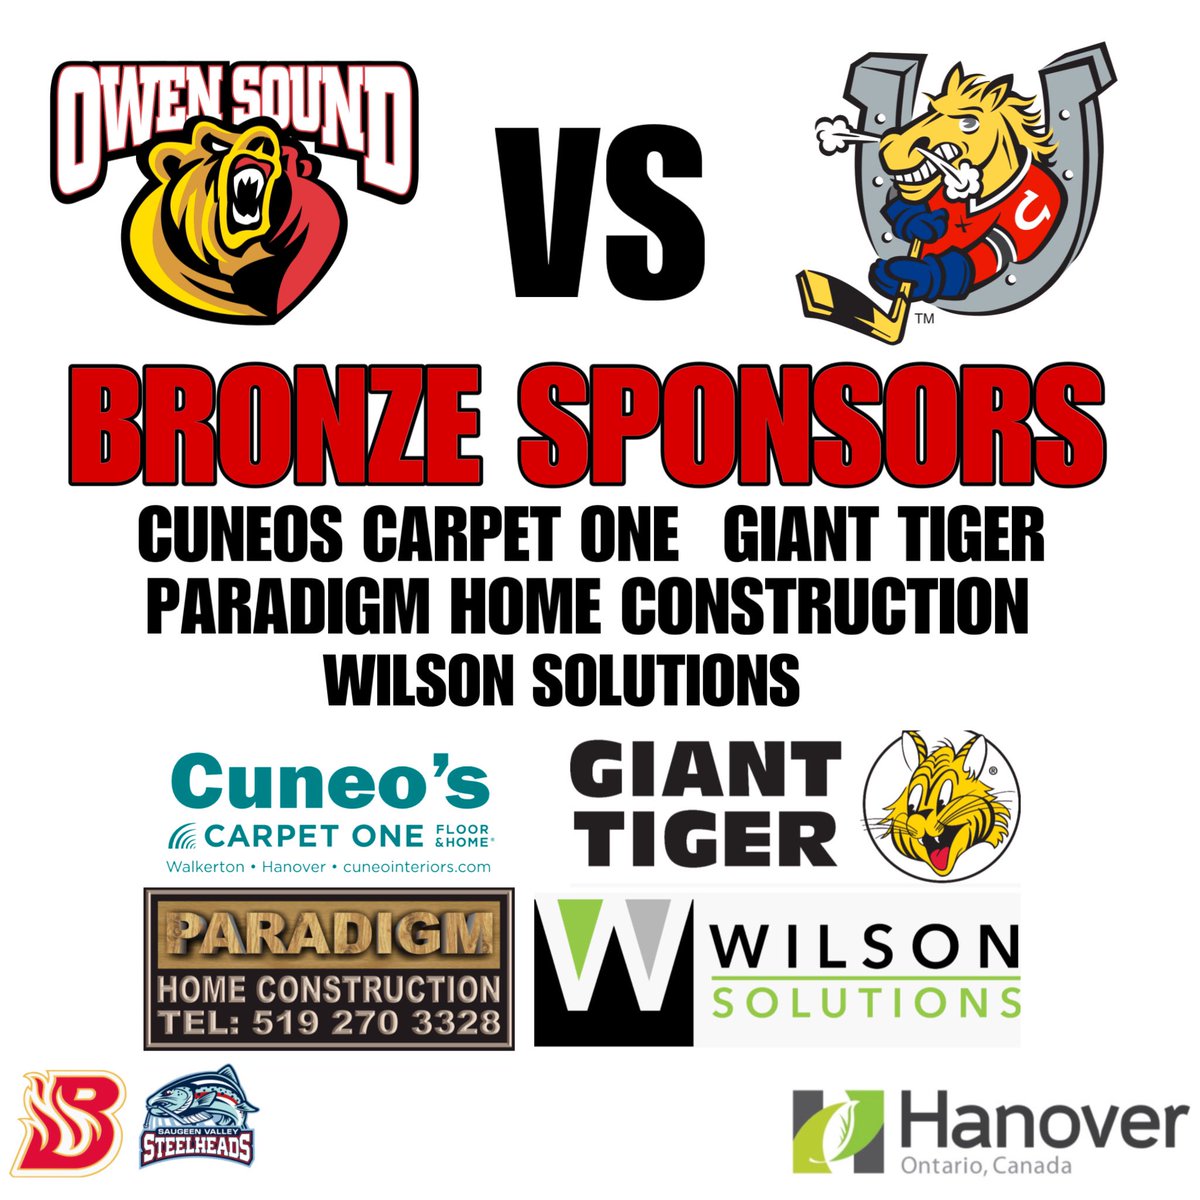 The Barons, Steelheads & Attack want to thank #CuneosCarpetOne, #GiantTiger, #ParadigmHomeConstruction & #WilsonSolutions for being Bronze Sponsors for Wednesday's game. #OHLComesToHanover